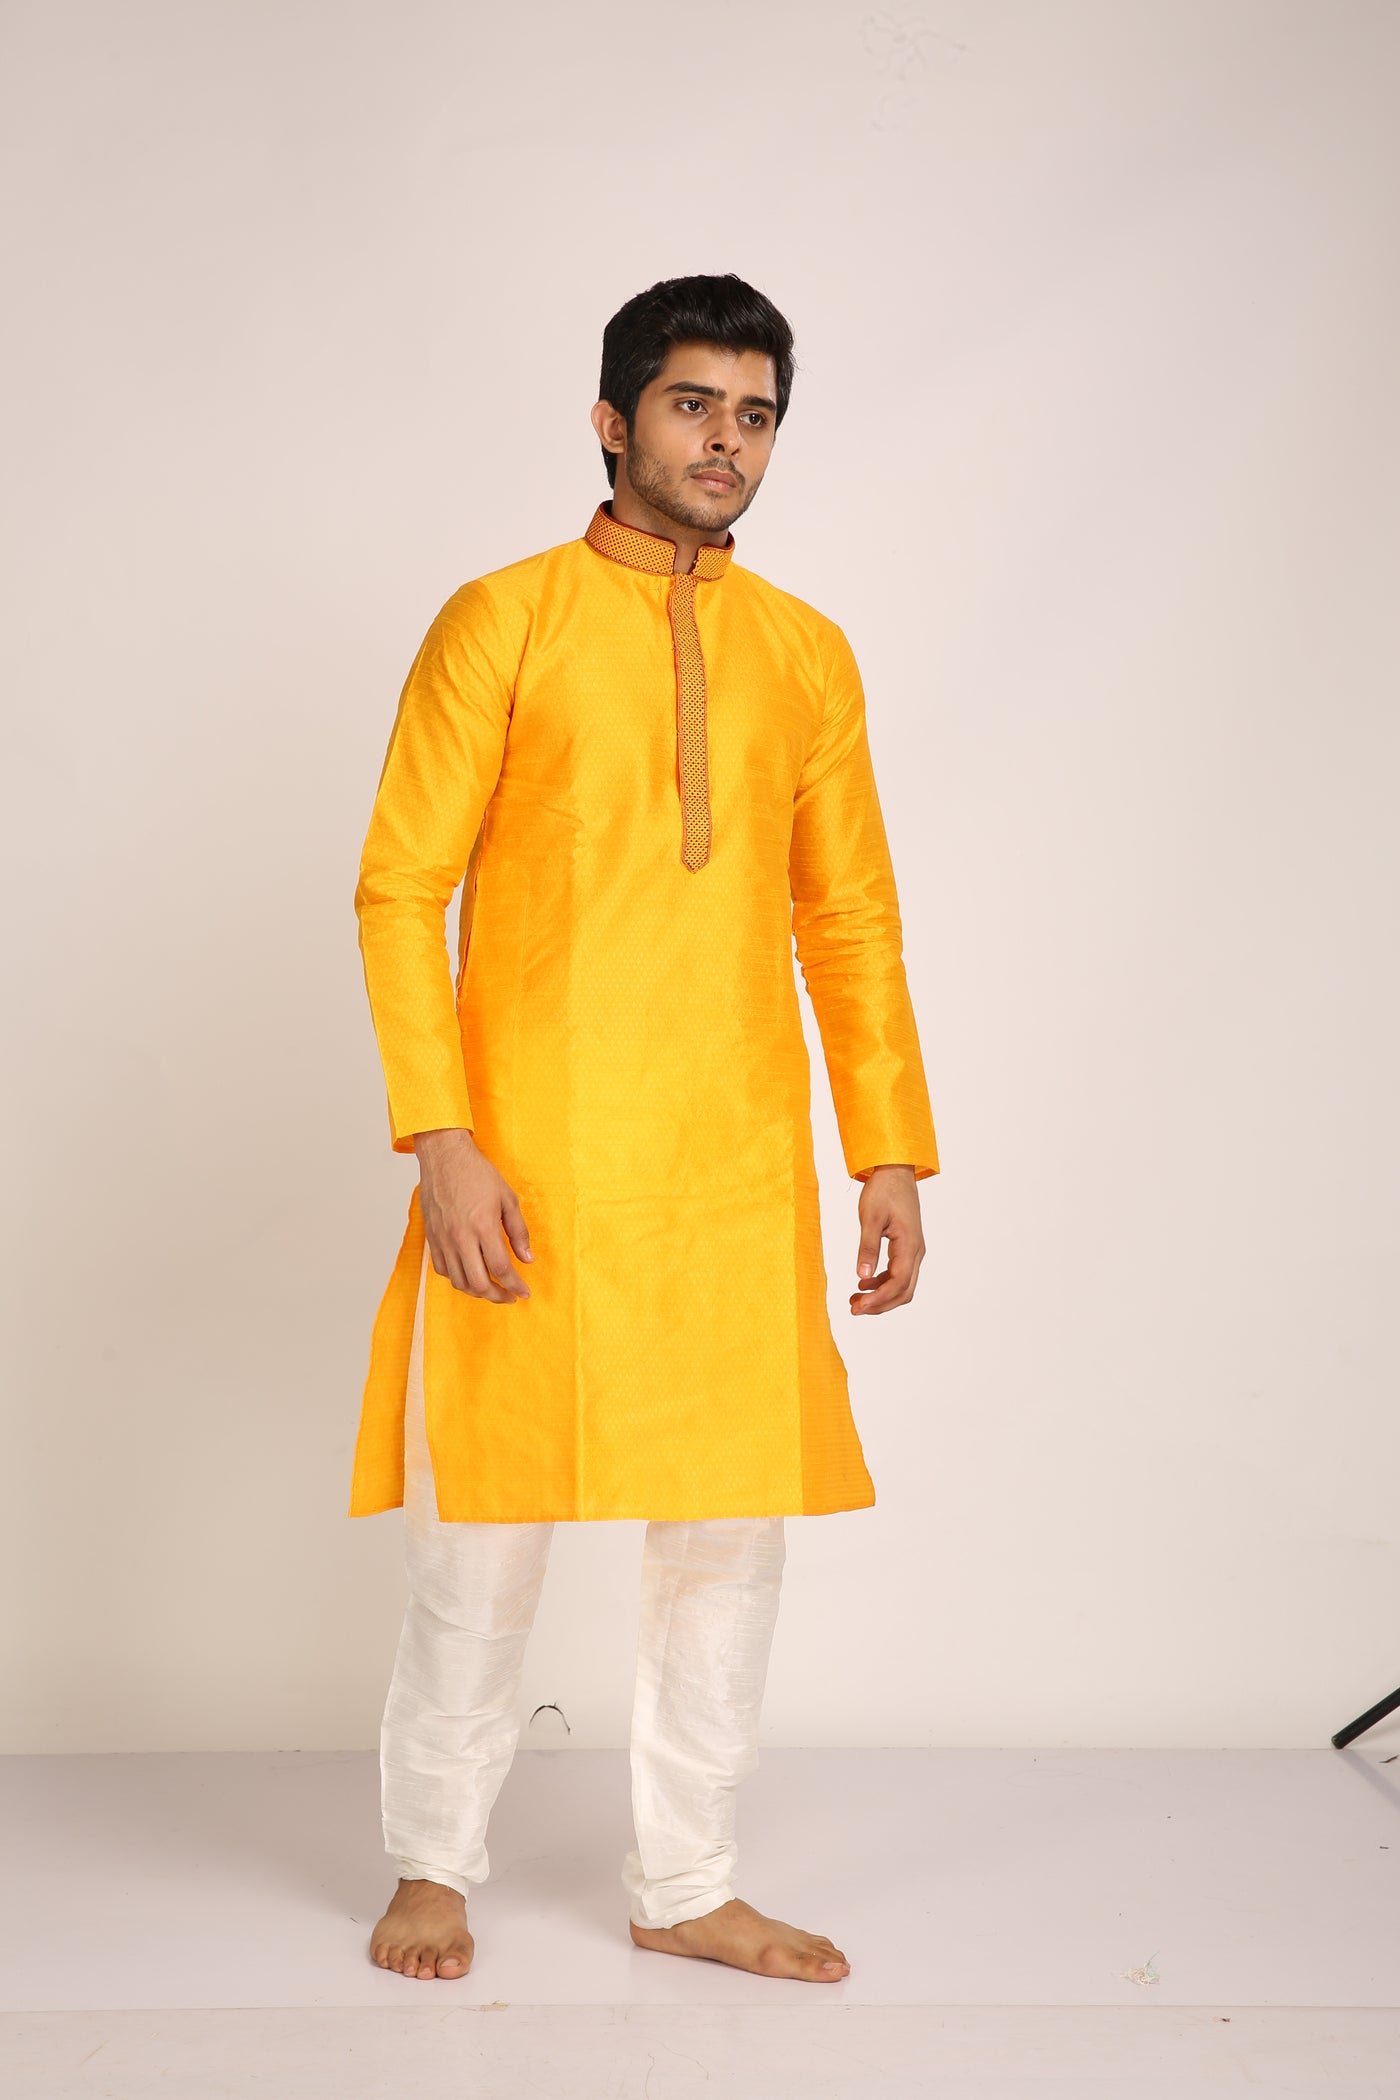 Glossed Regular Fit Kurta Indian Clothing in Denver, CO, Aurora, CO, Boulder, CO, Fort Collins, CO, Colorado Springs, CO, Parker, CO, Highlands Ranch, CO, Cherry Creek, CO, Centennial, CO, and Longmont, CO. NATIONWIDE SHIPPING USA- India Fashion X